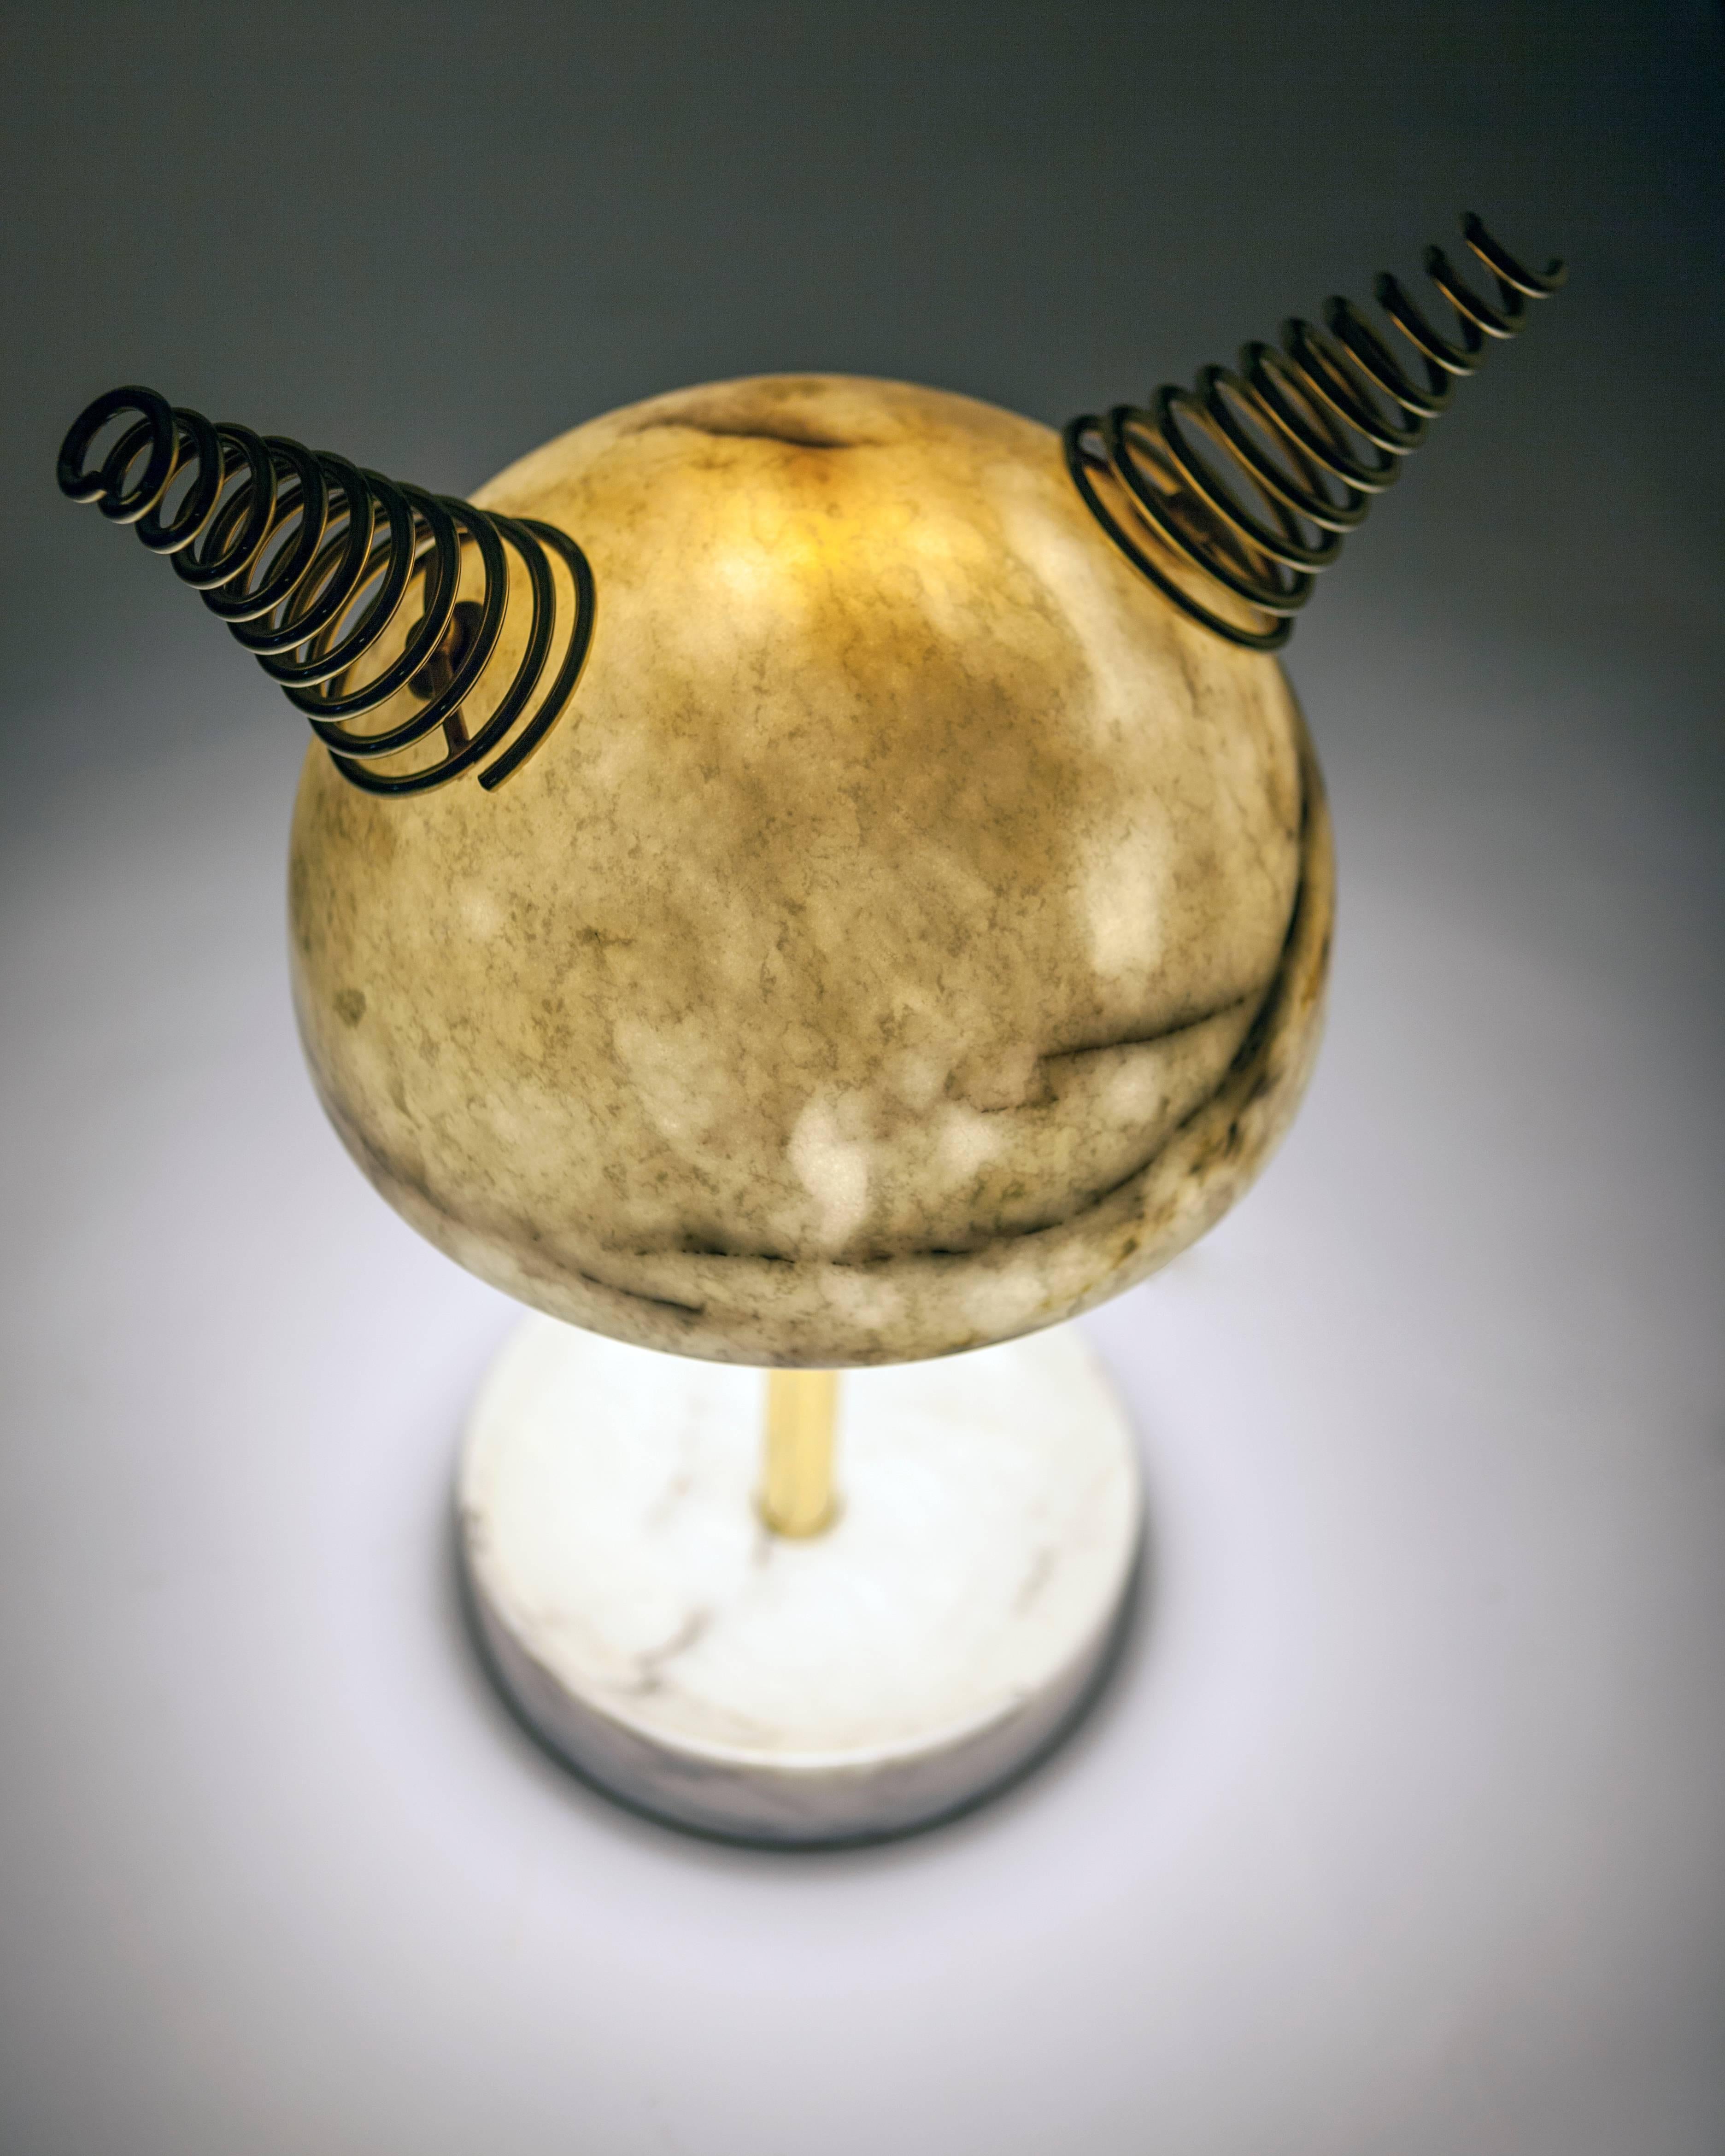 Min Lilla Anime is the new version of the Min Lilla Viking lamp. Horns are replaced with the swivel metal strings resembling the hair of the Japanese anime characters. Veins of the Leylak marble gives out a purplish hue and the metal color can be